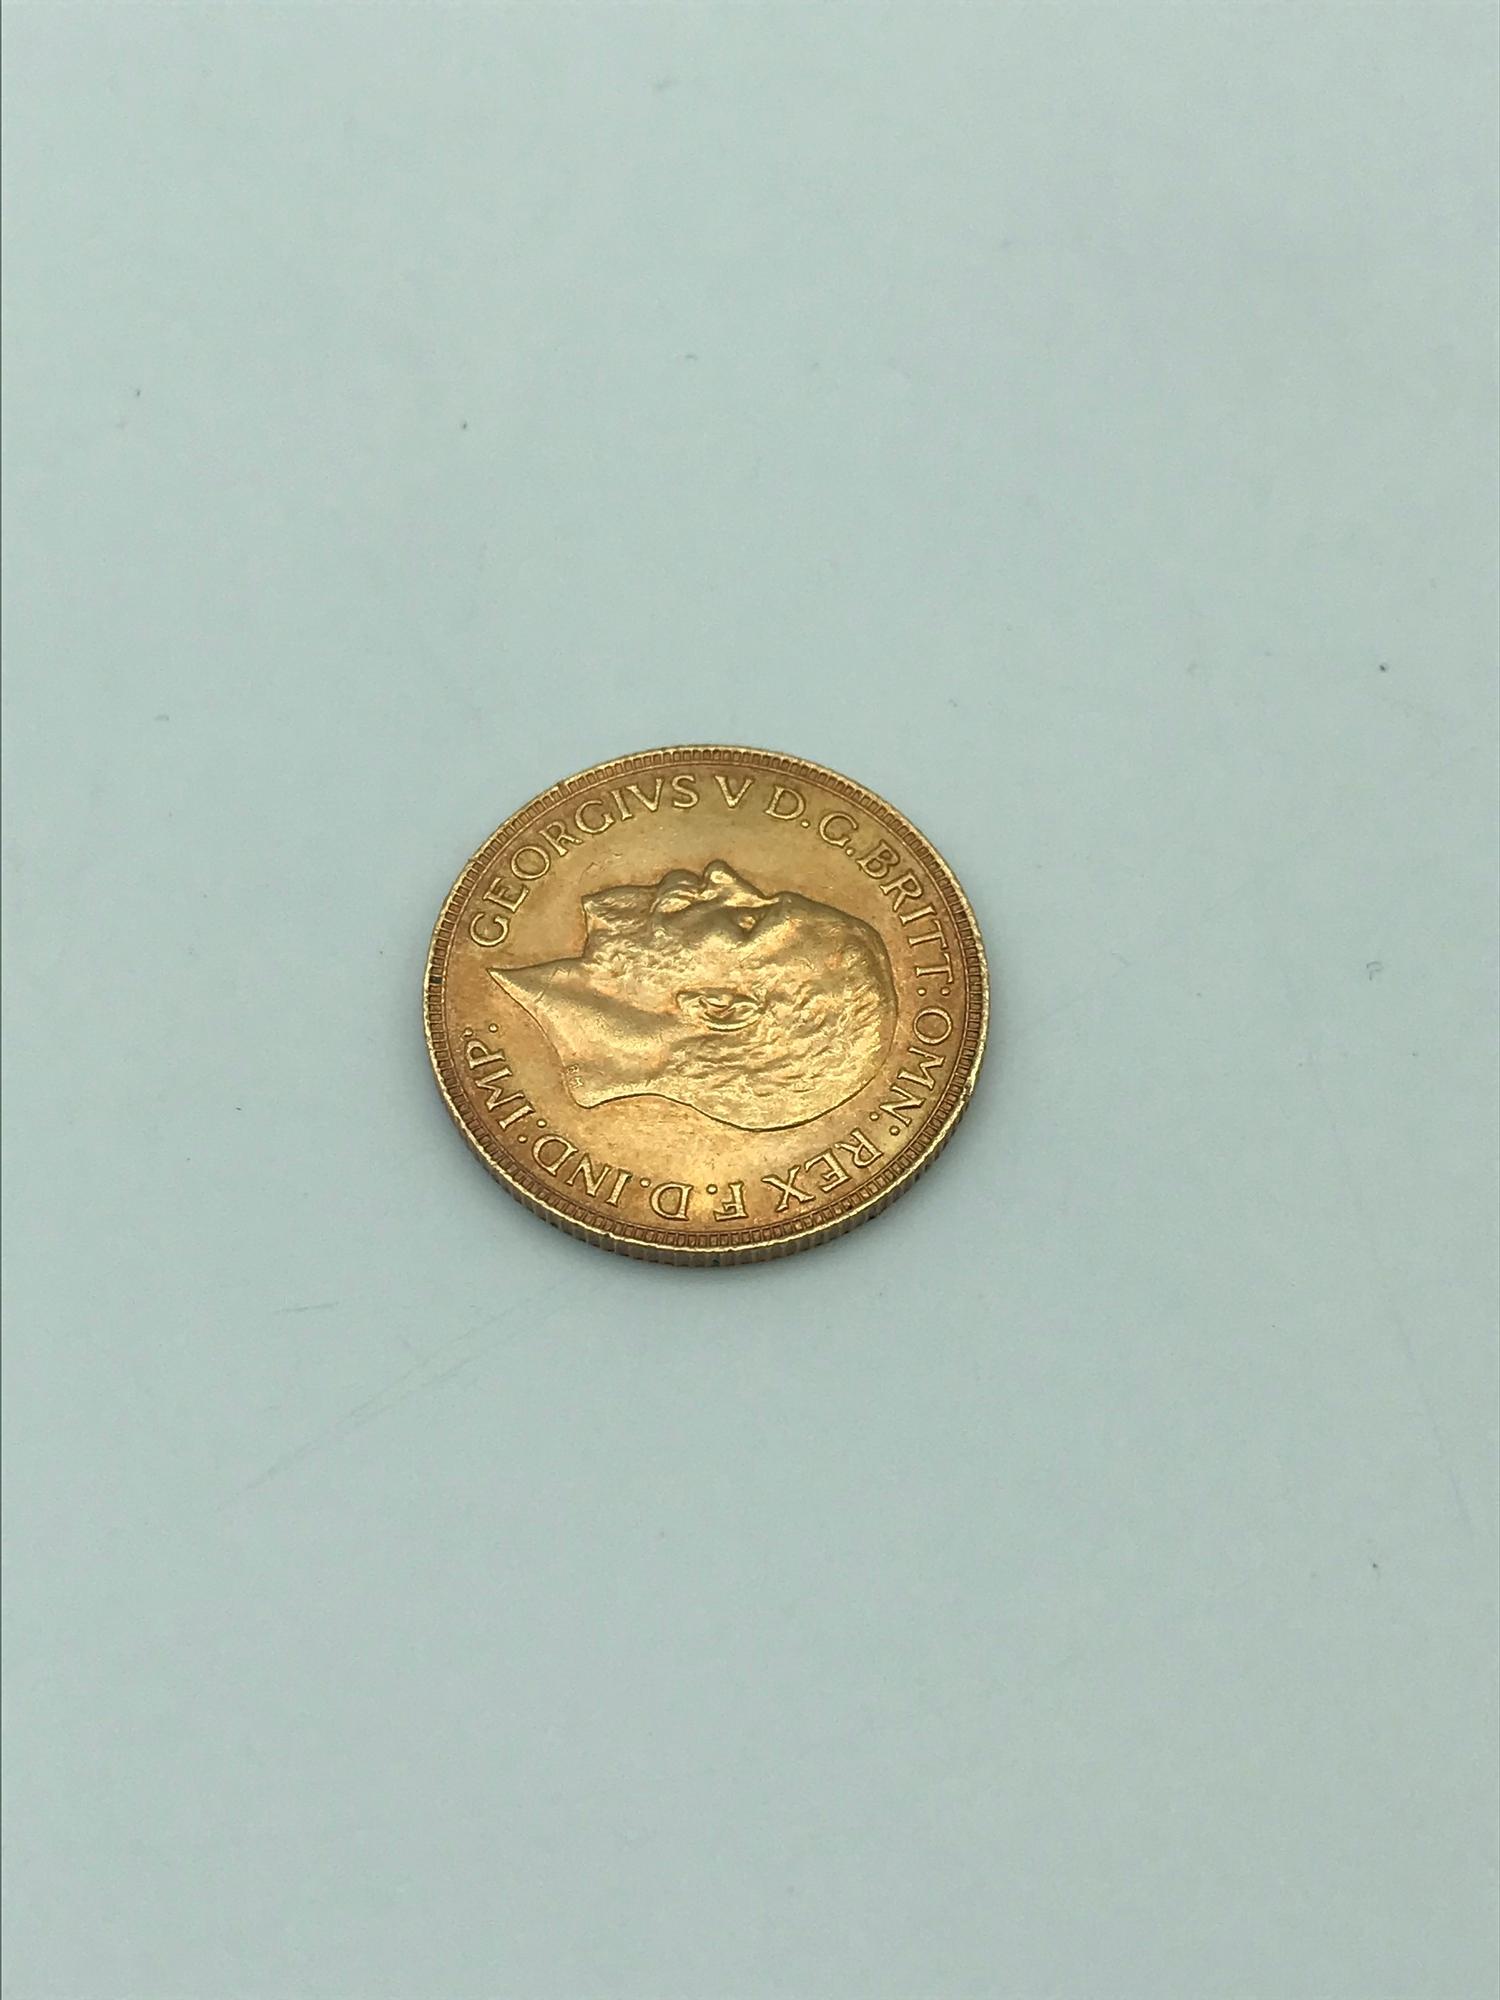 A Gold 1931 full sovereign coin.